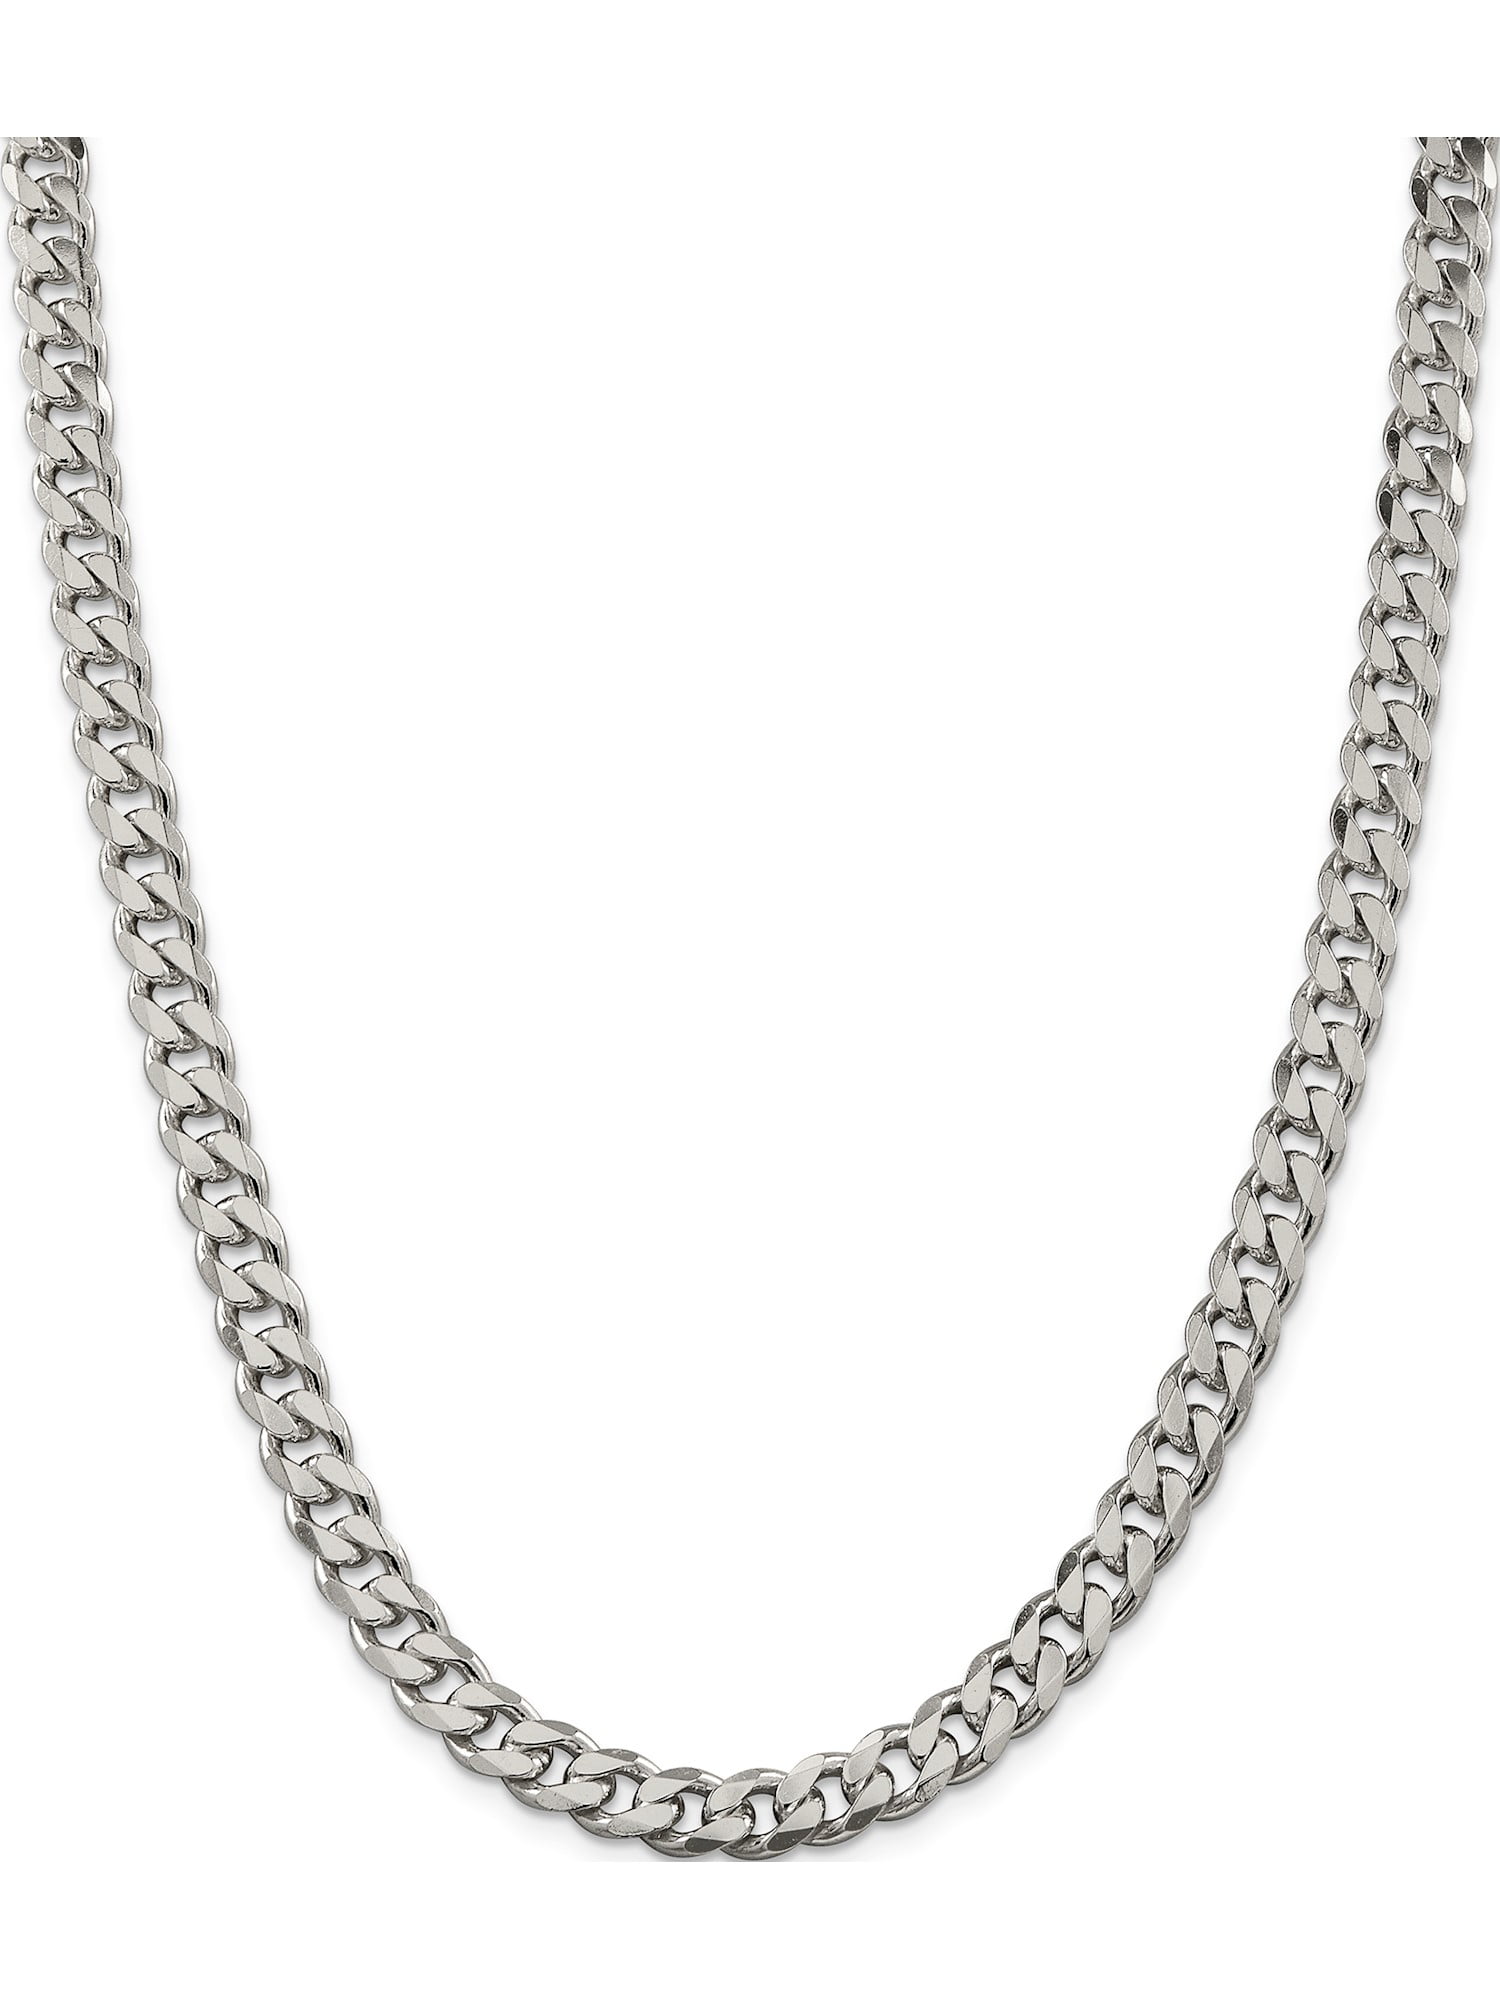 UNISEX MADE IN ITALY 925 Sterling silver 8mm wide CURB 18"-24" CHAIN Necklace 